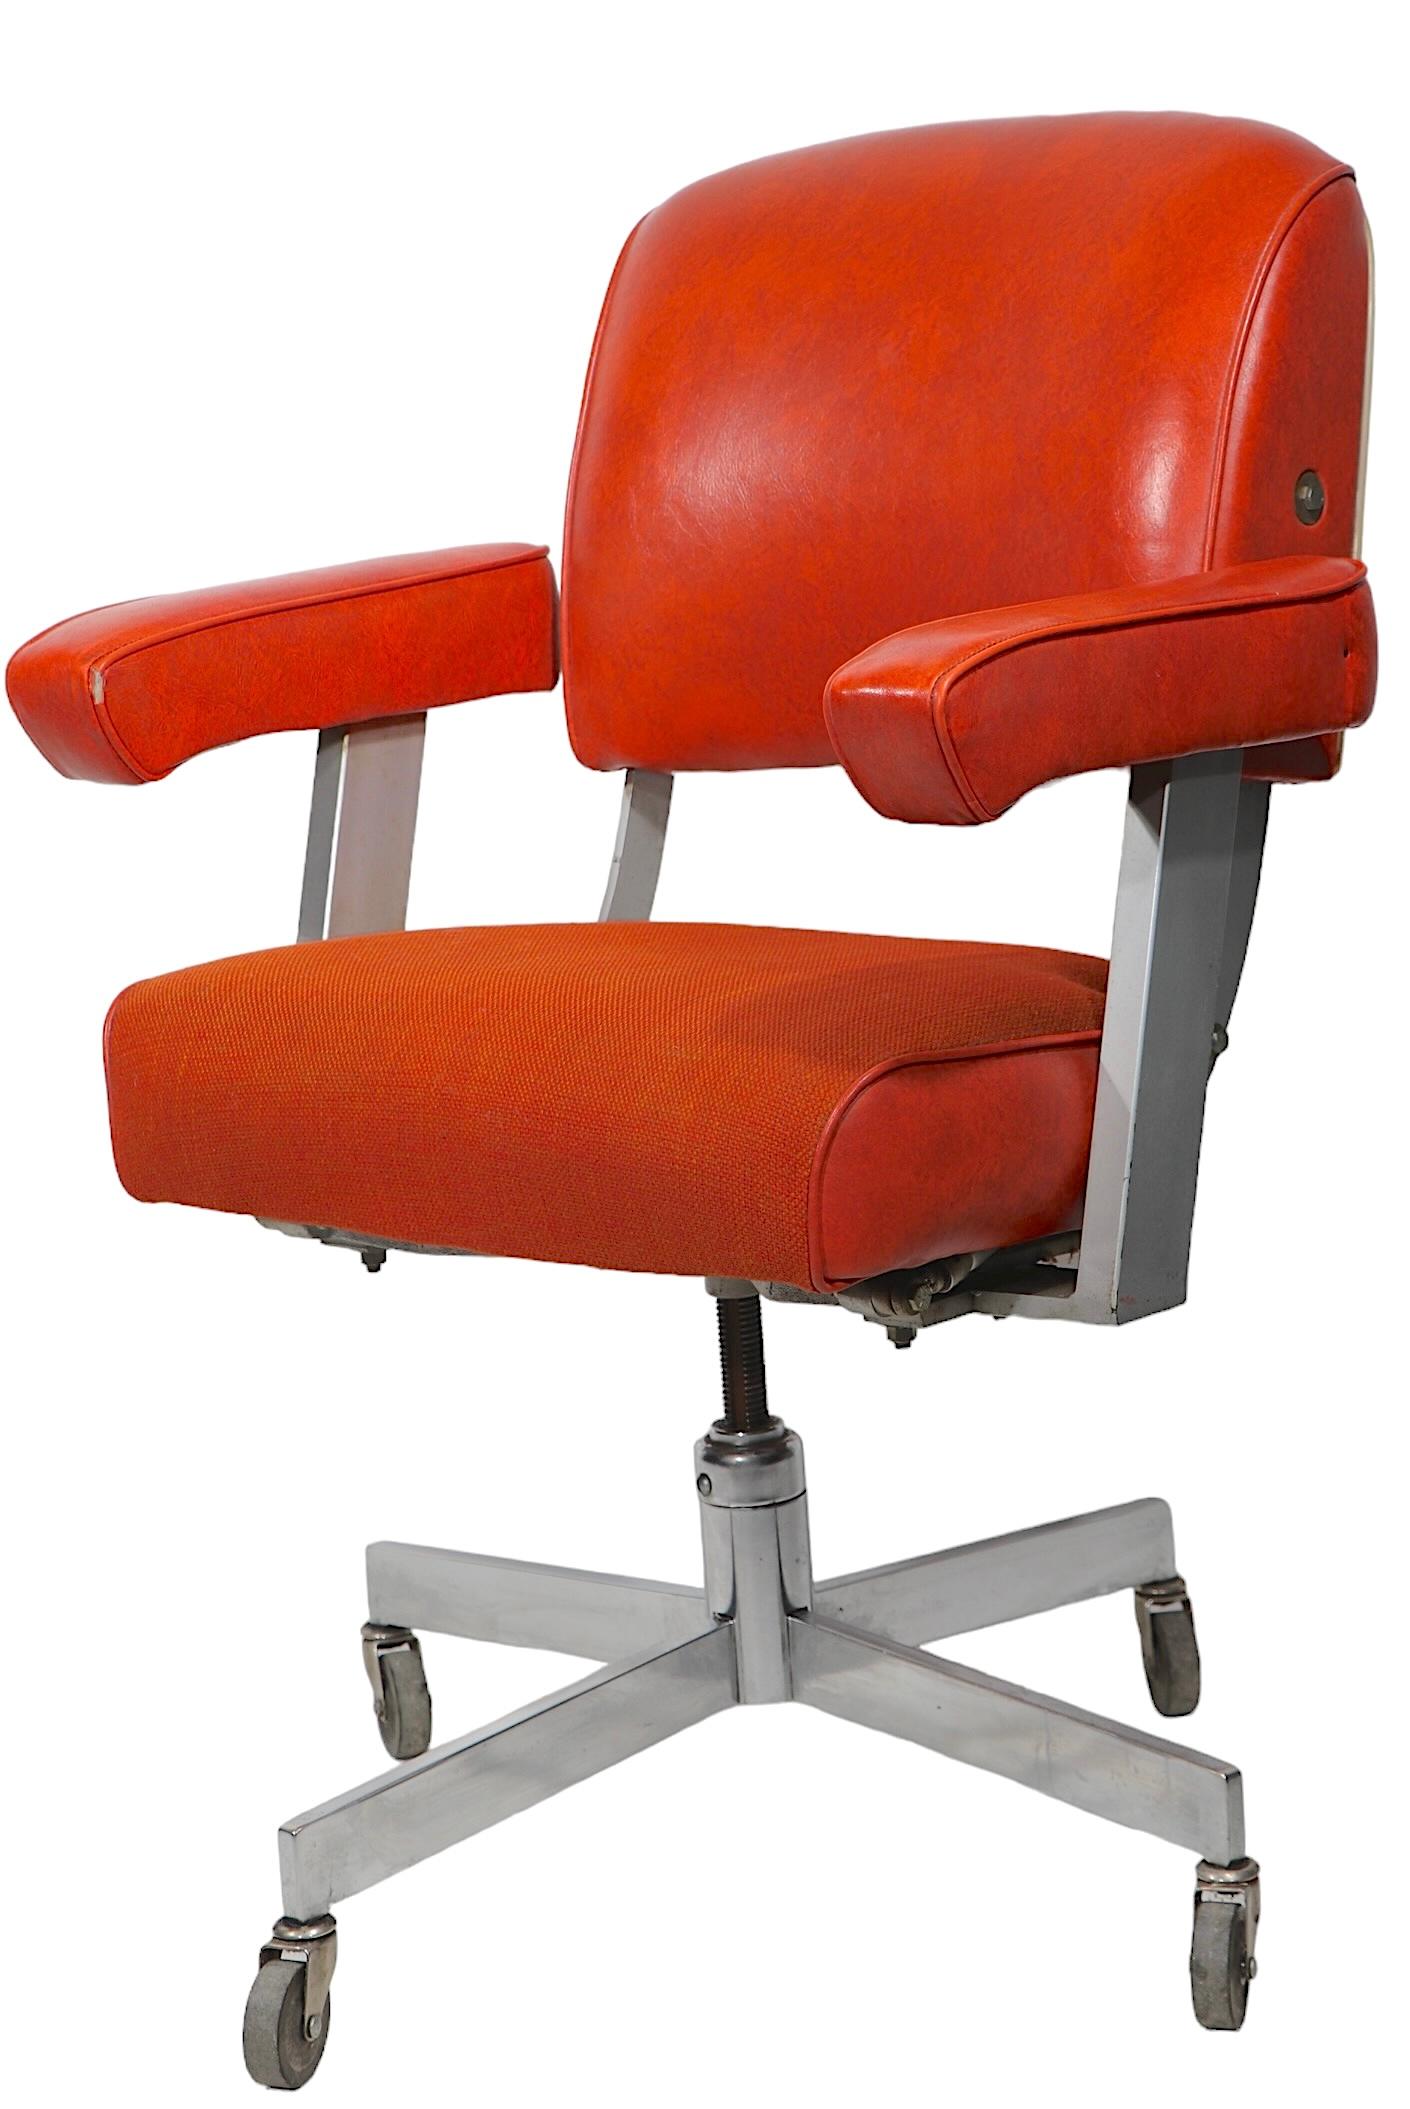 Executive Model DoMore Swivel Desk Office Chair Model 616 c 1950/1960's  For Sale 7